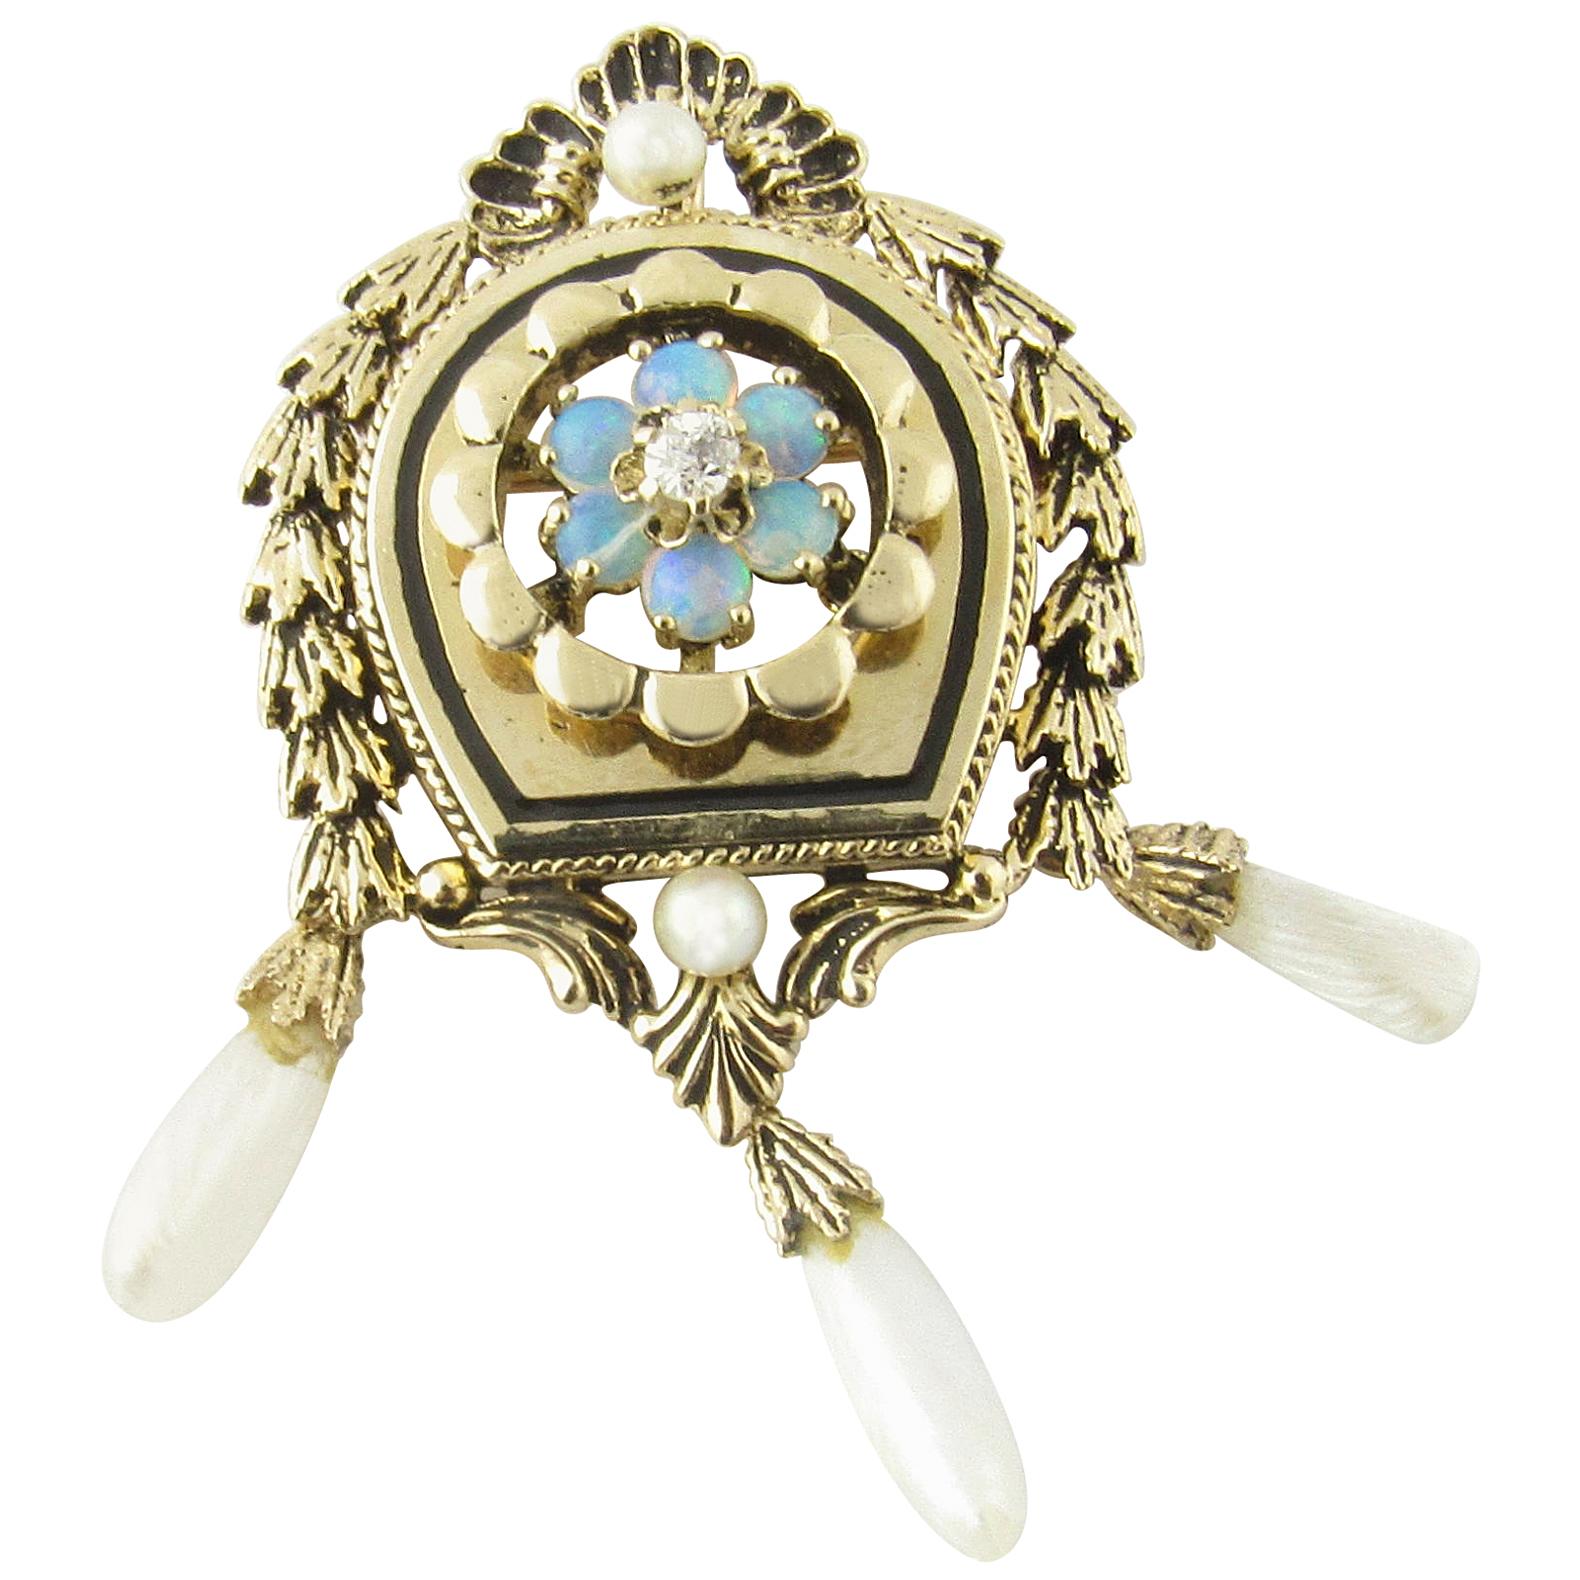 Antique 14 Karat Yellow Gold Opal and Pearl Brooch or Pendant